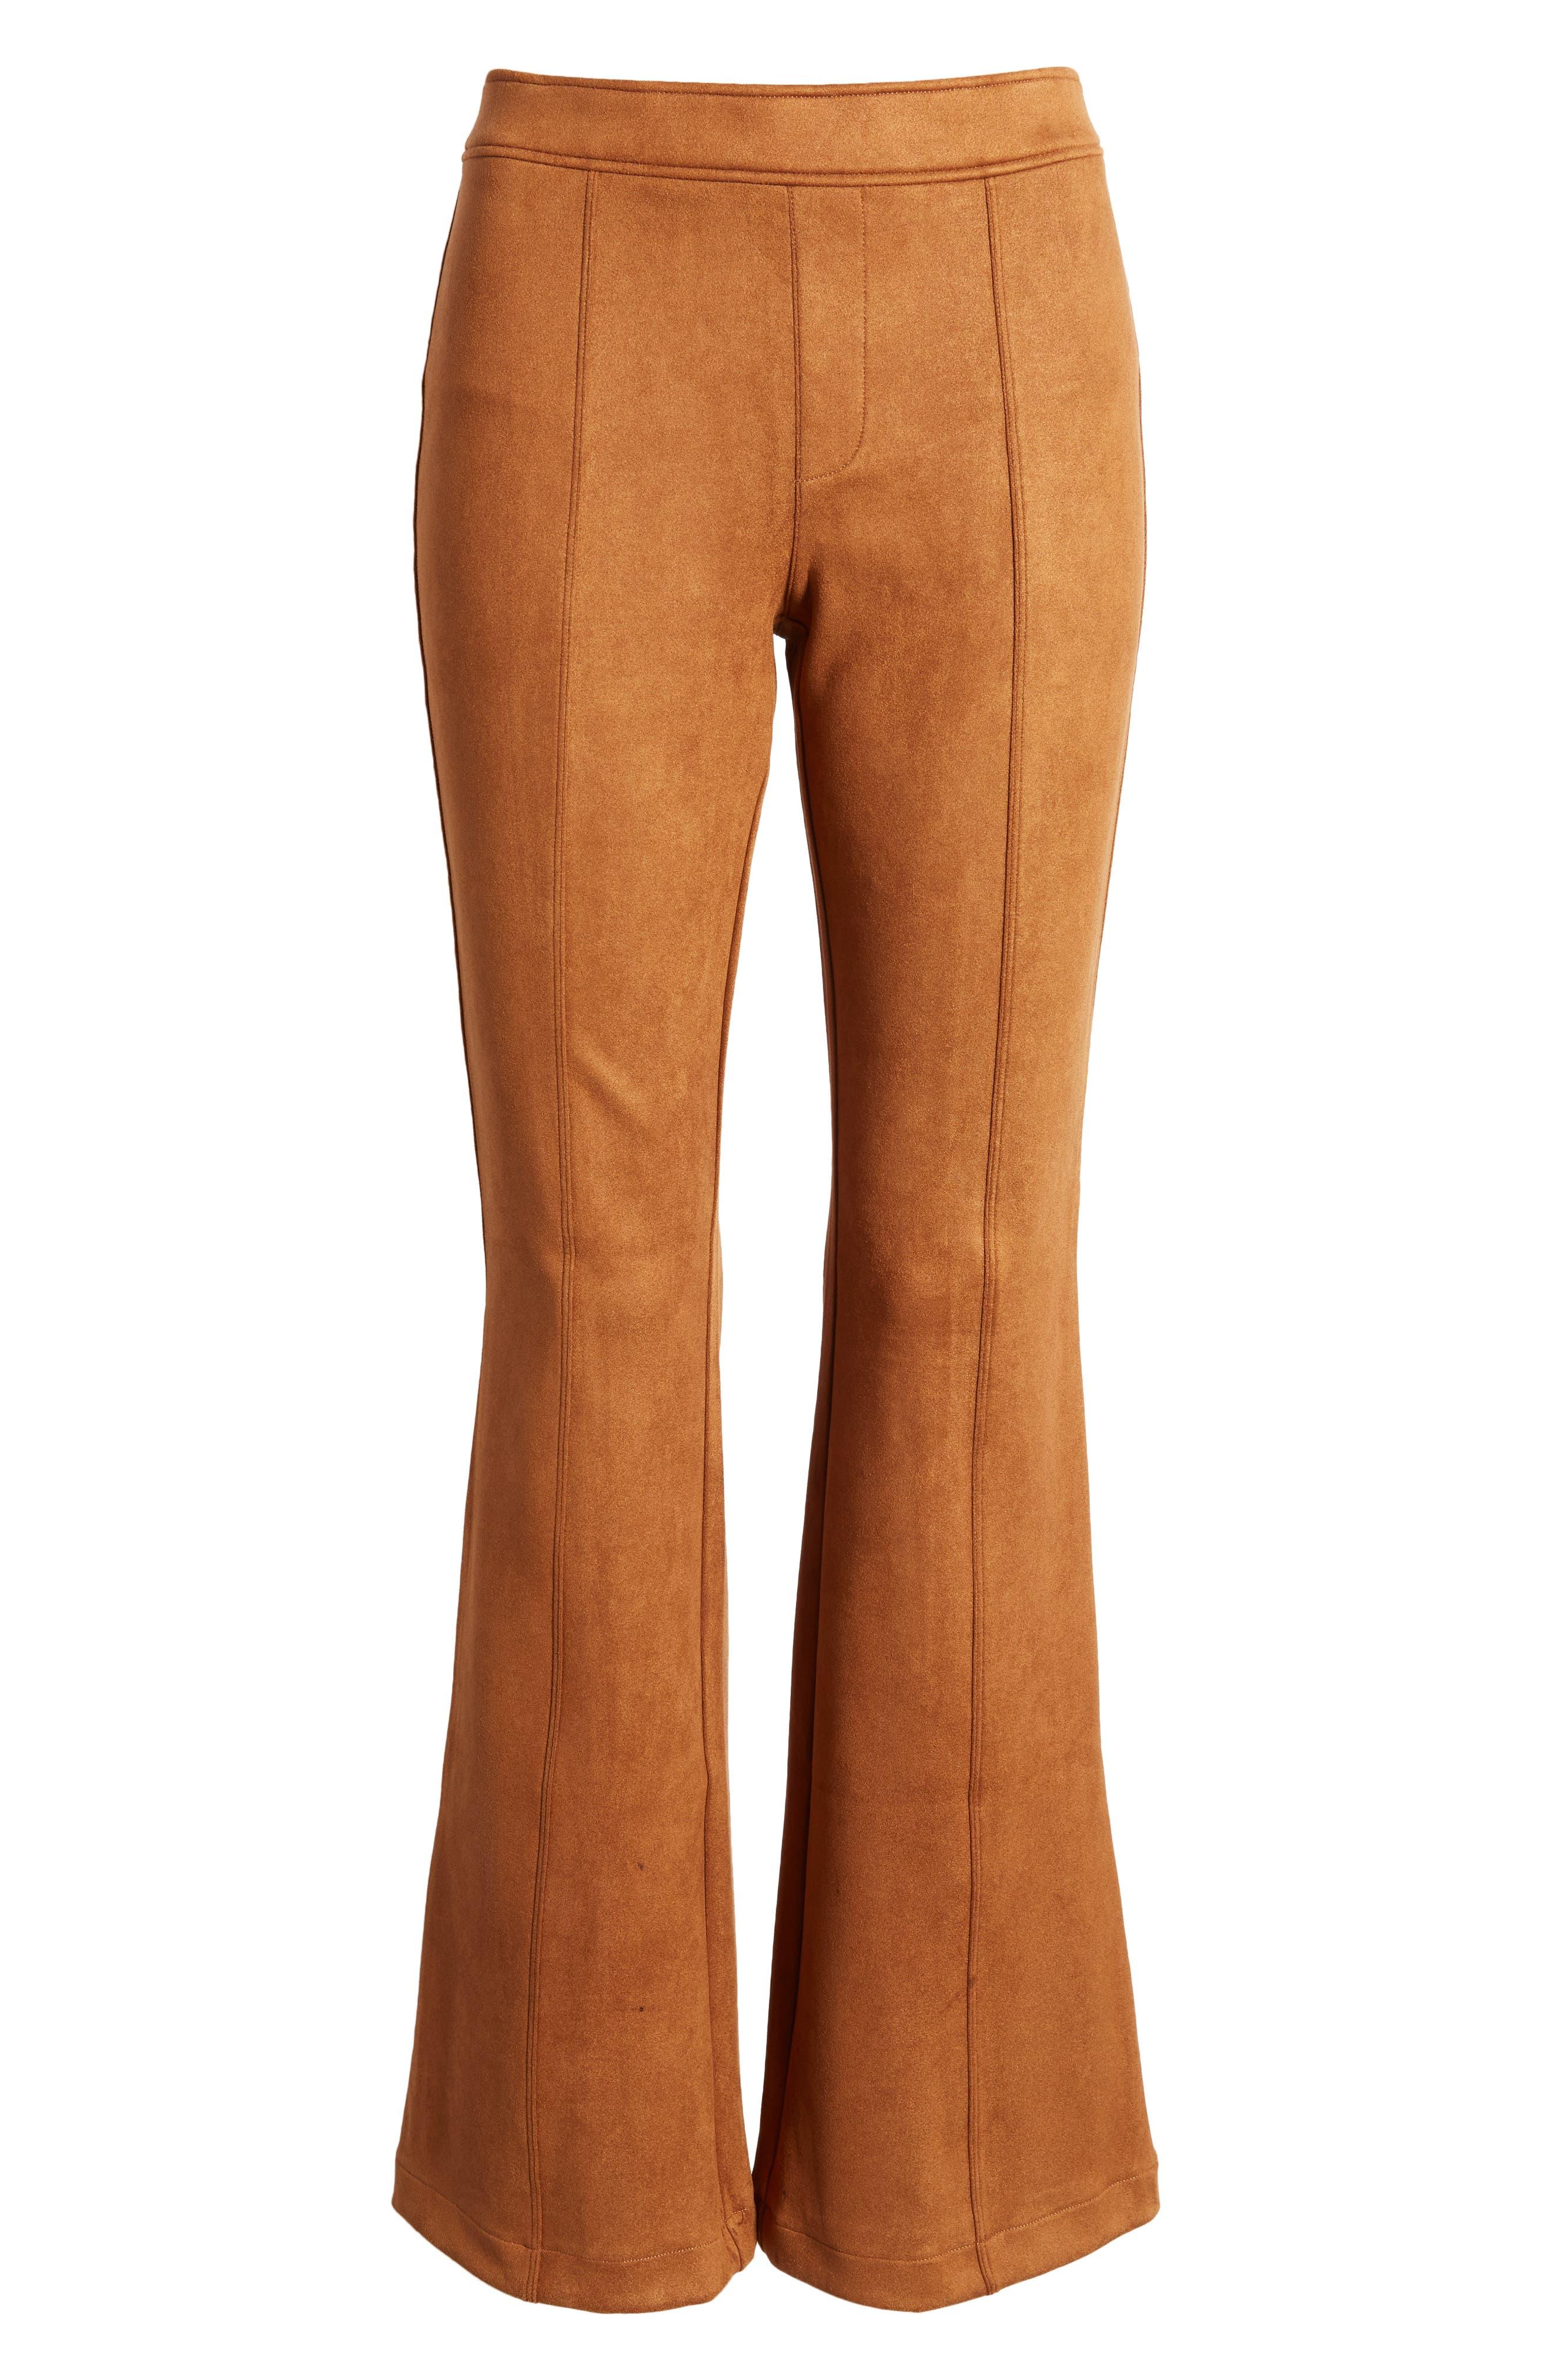 Spanx Faux Suede Flare Pants in Brown